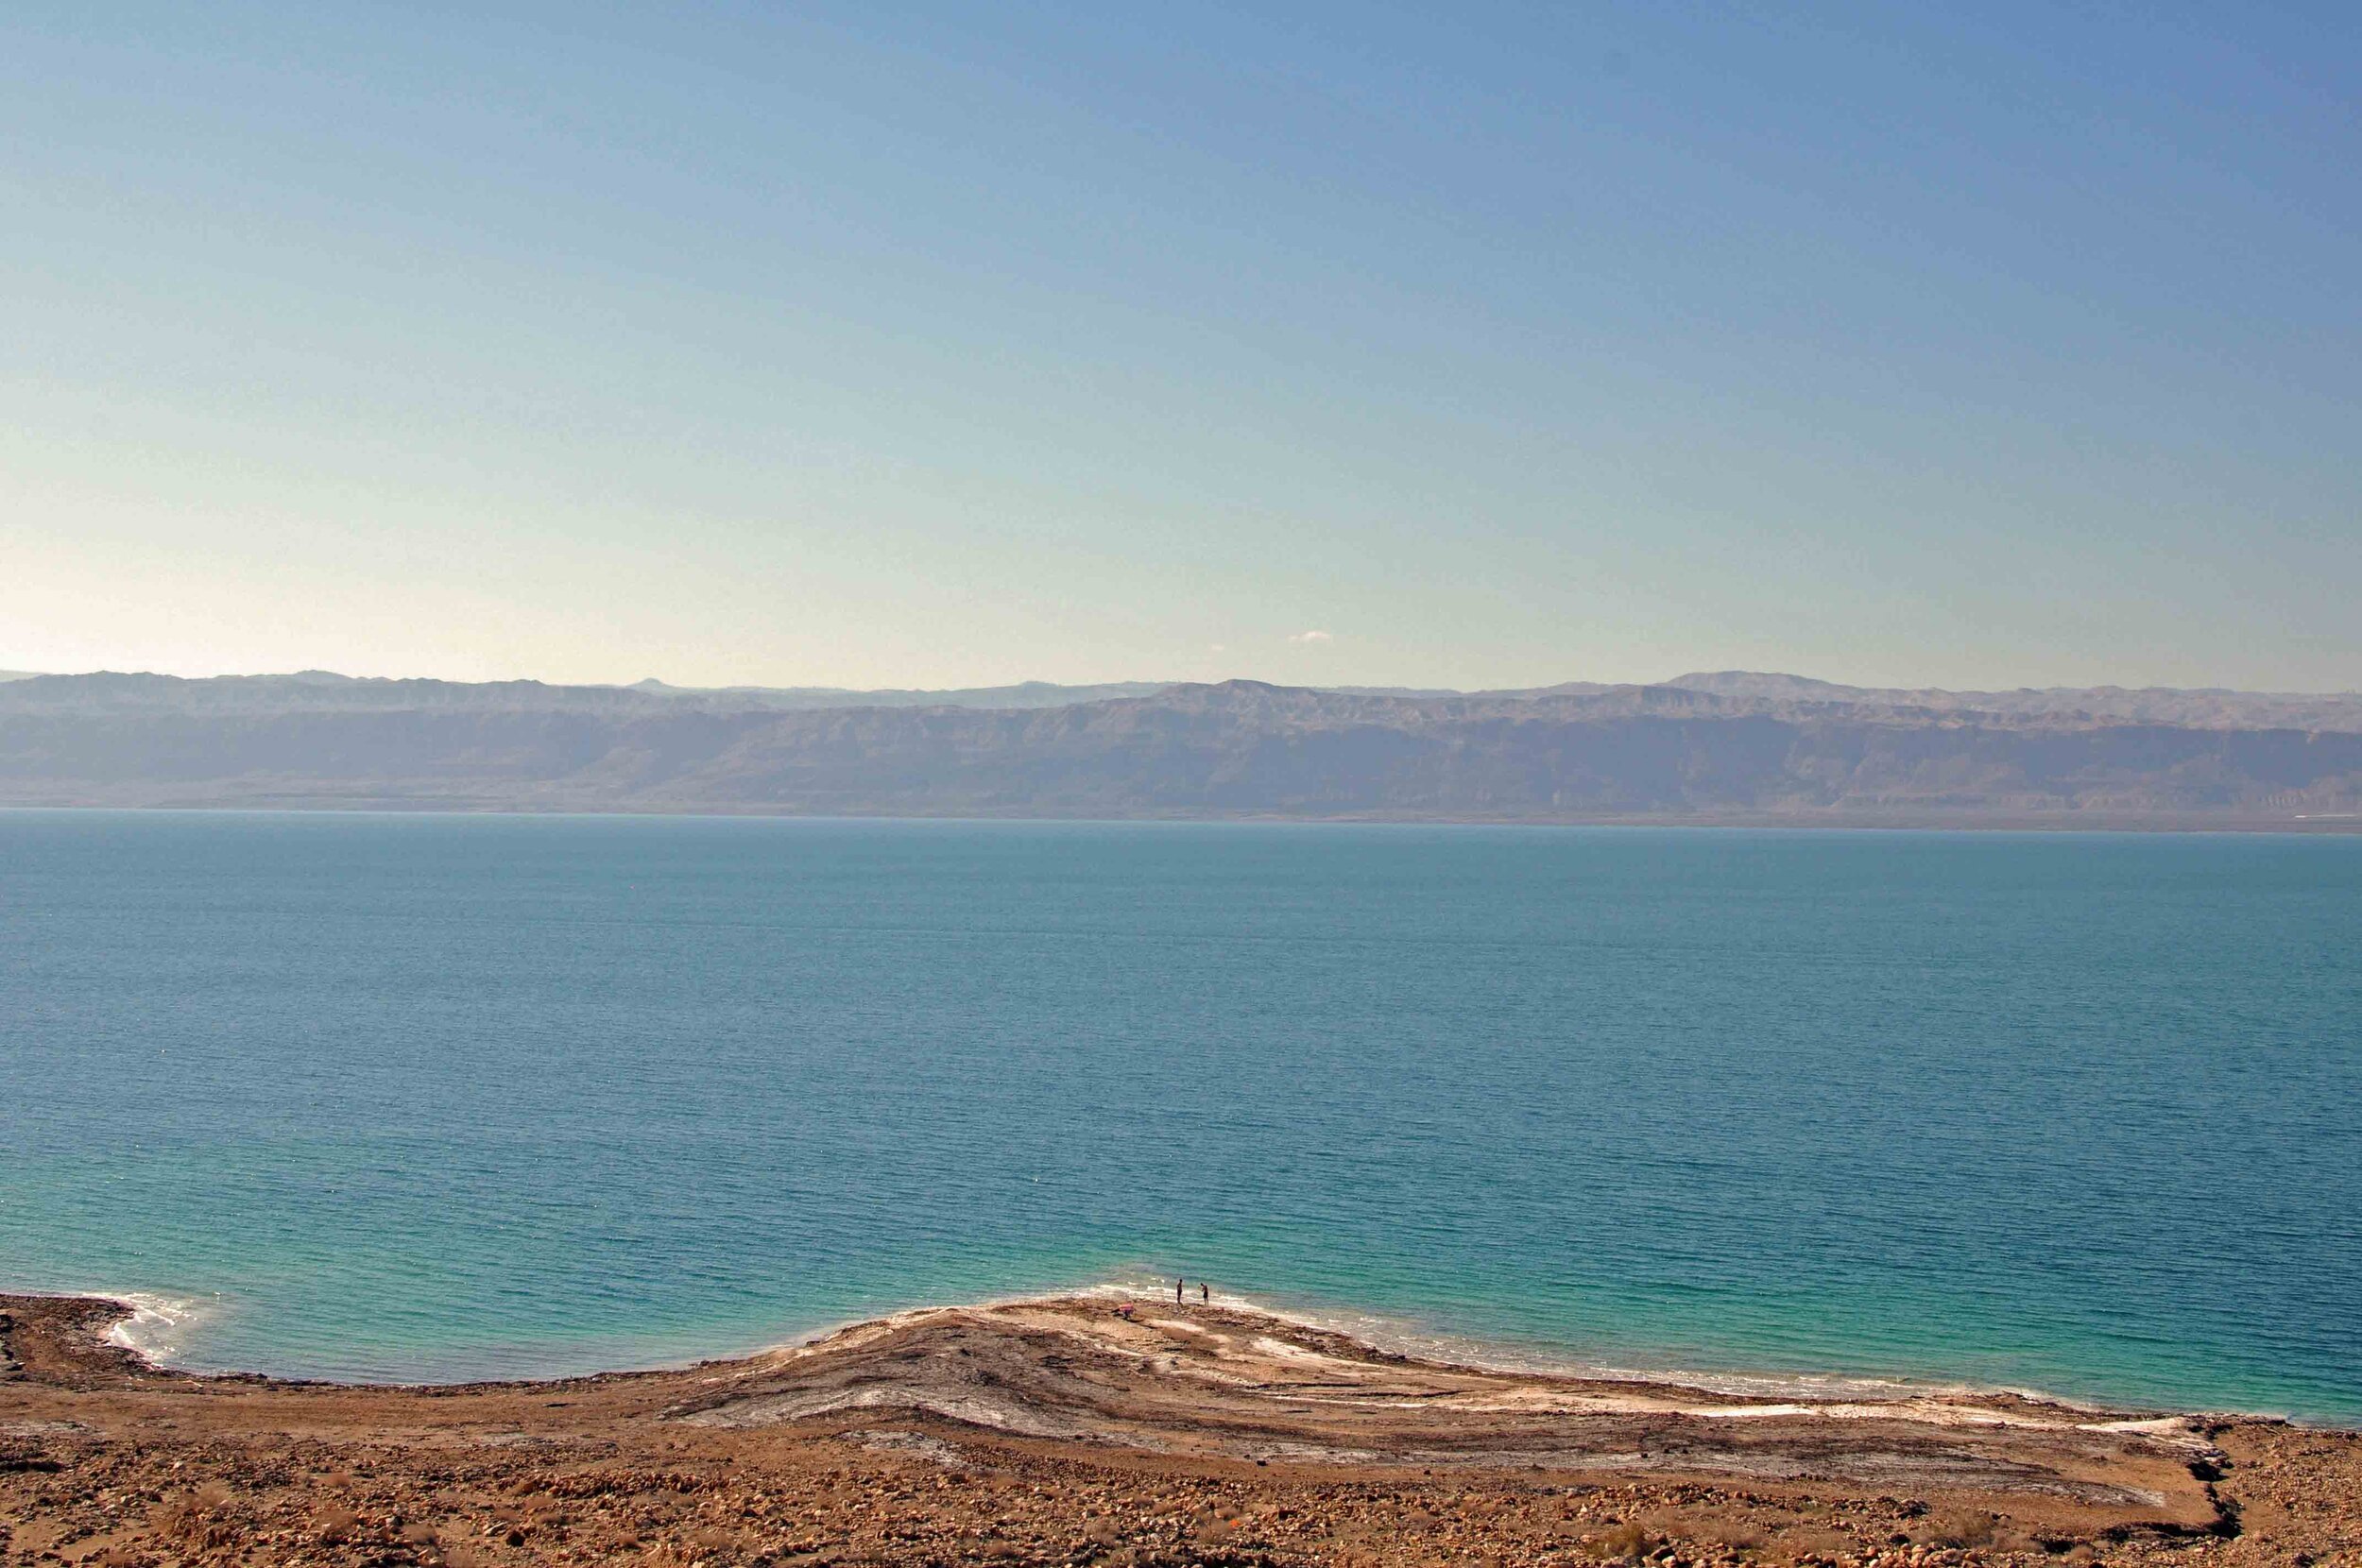 Your Guide to Visiting the Dead Sea